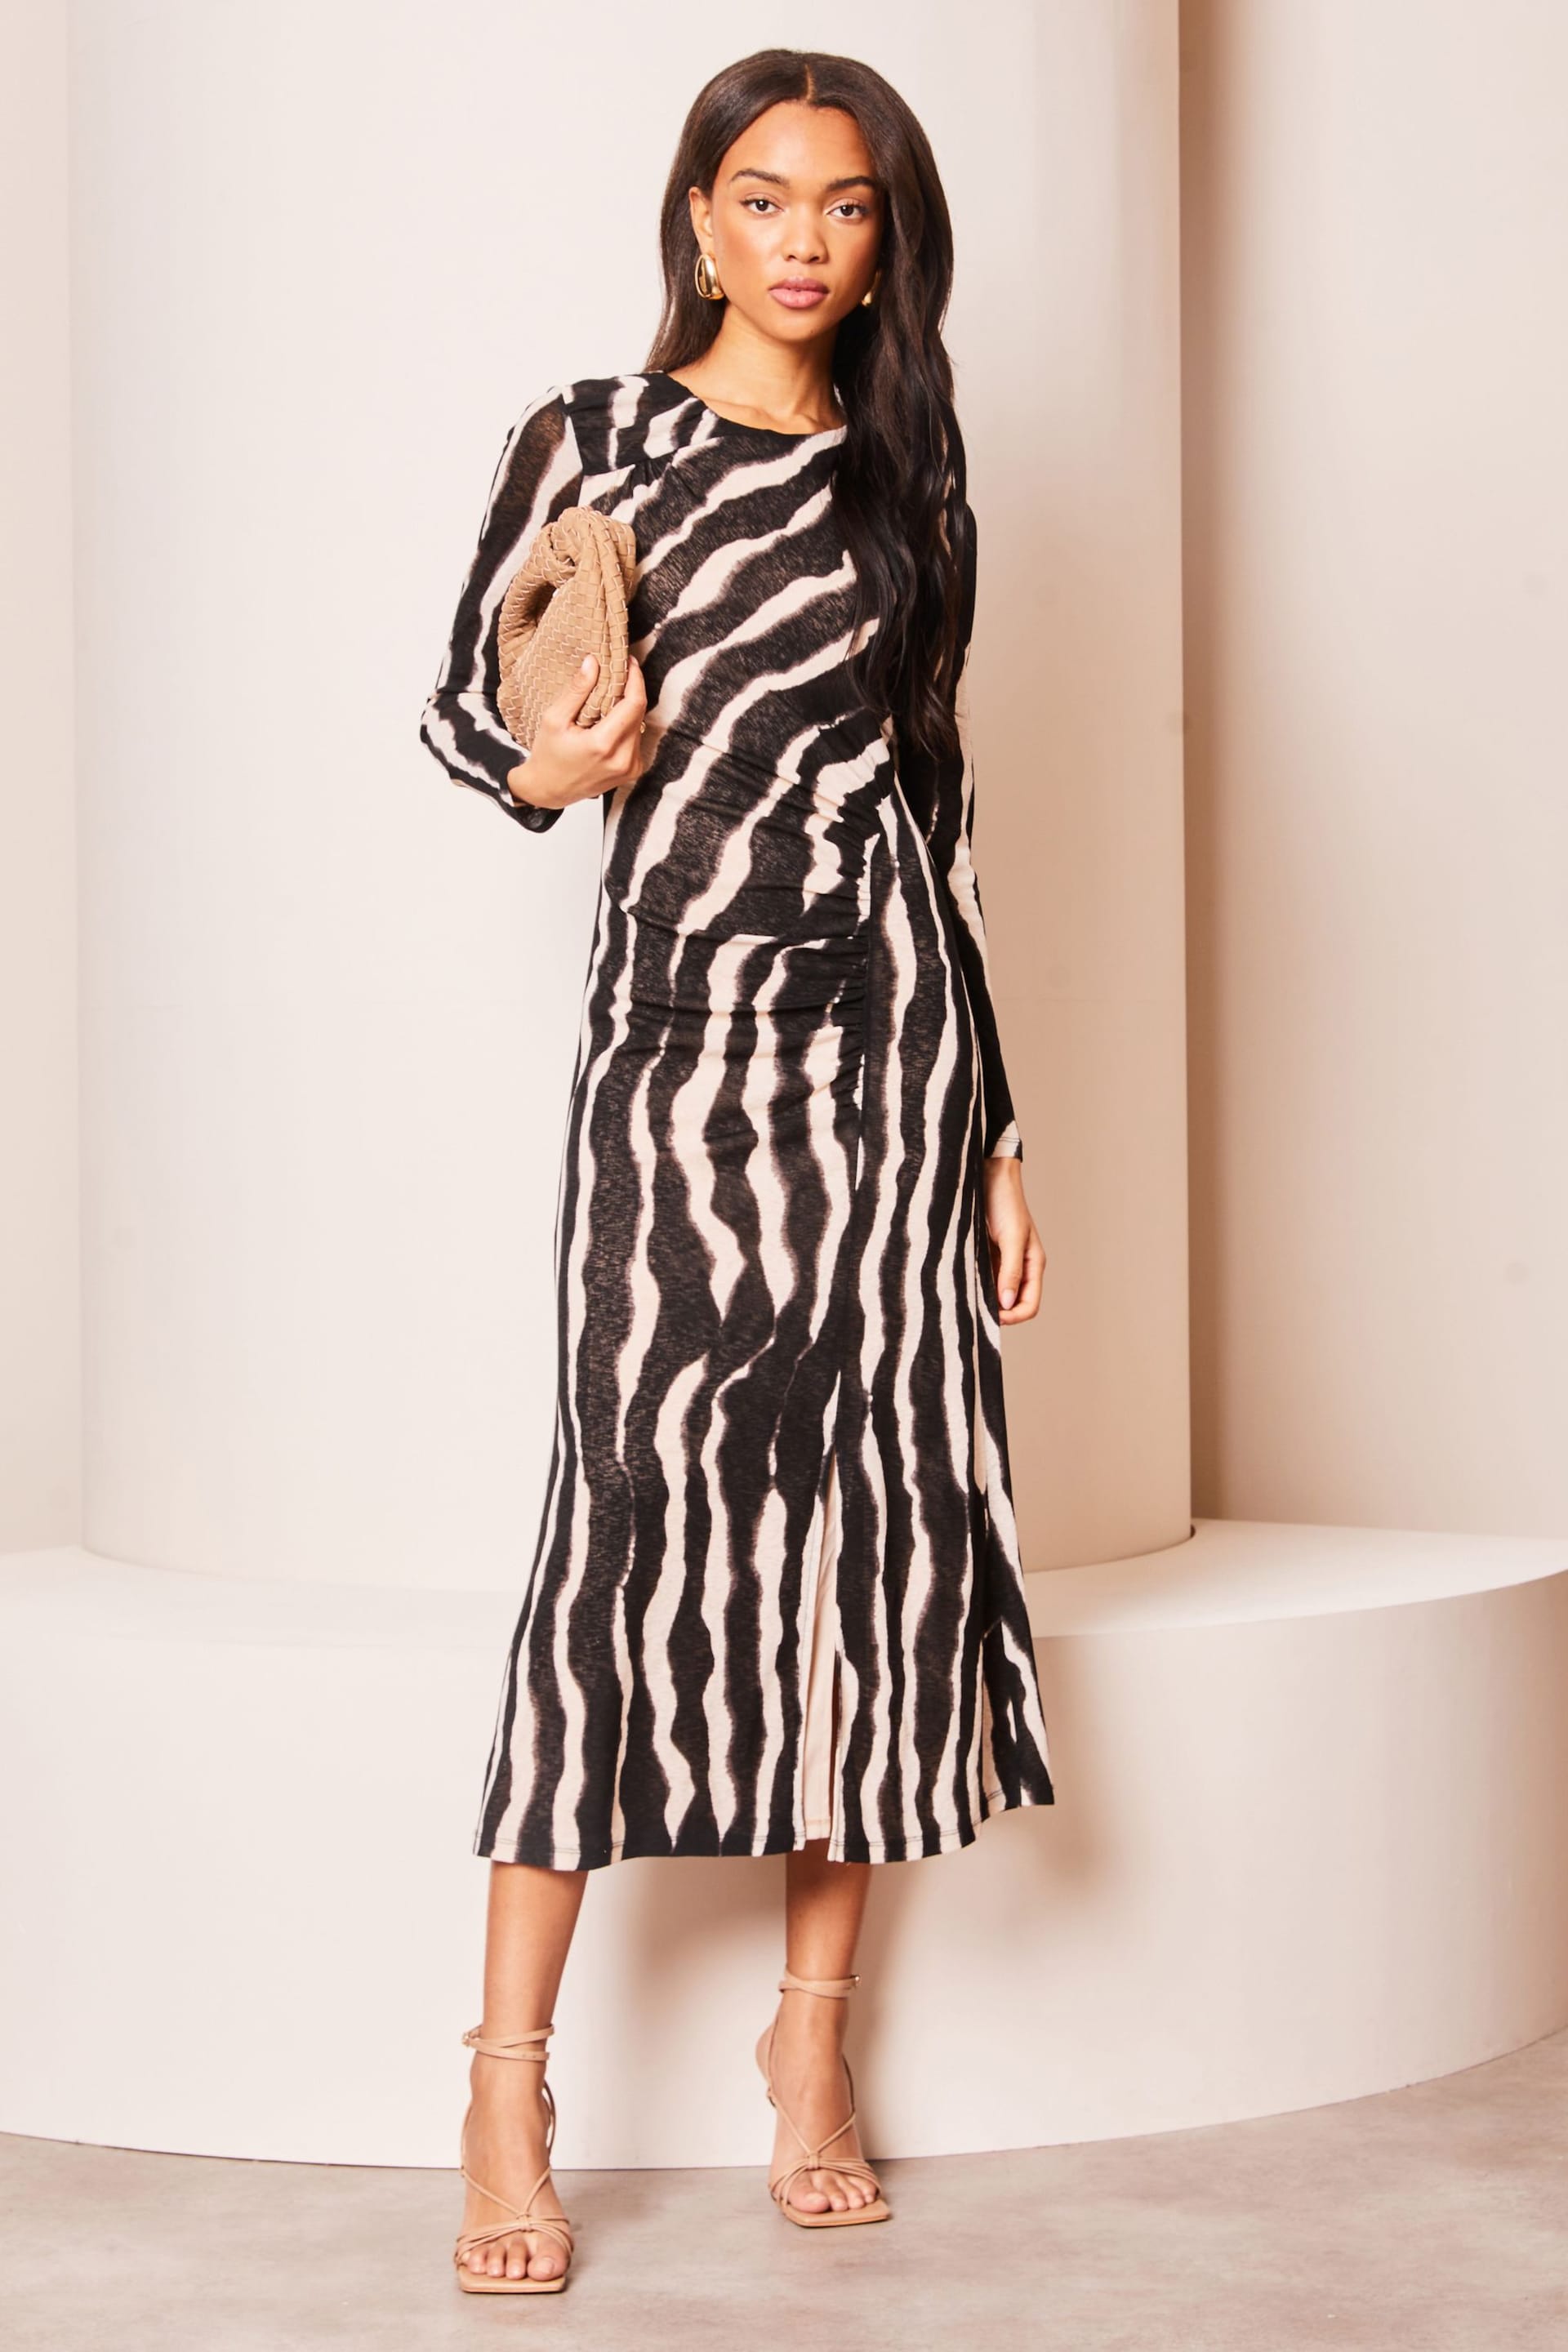 Lipsy Black/White Petite Printed Ruched Midaxi Dress - Image 3 of 4